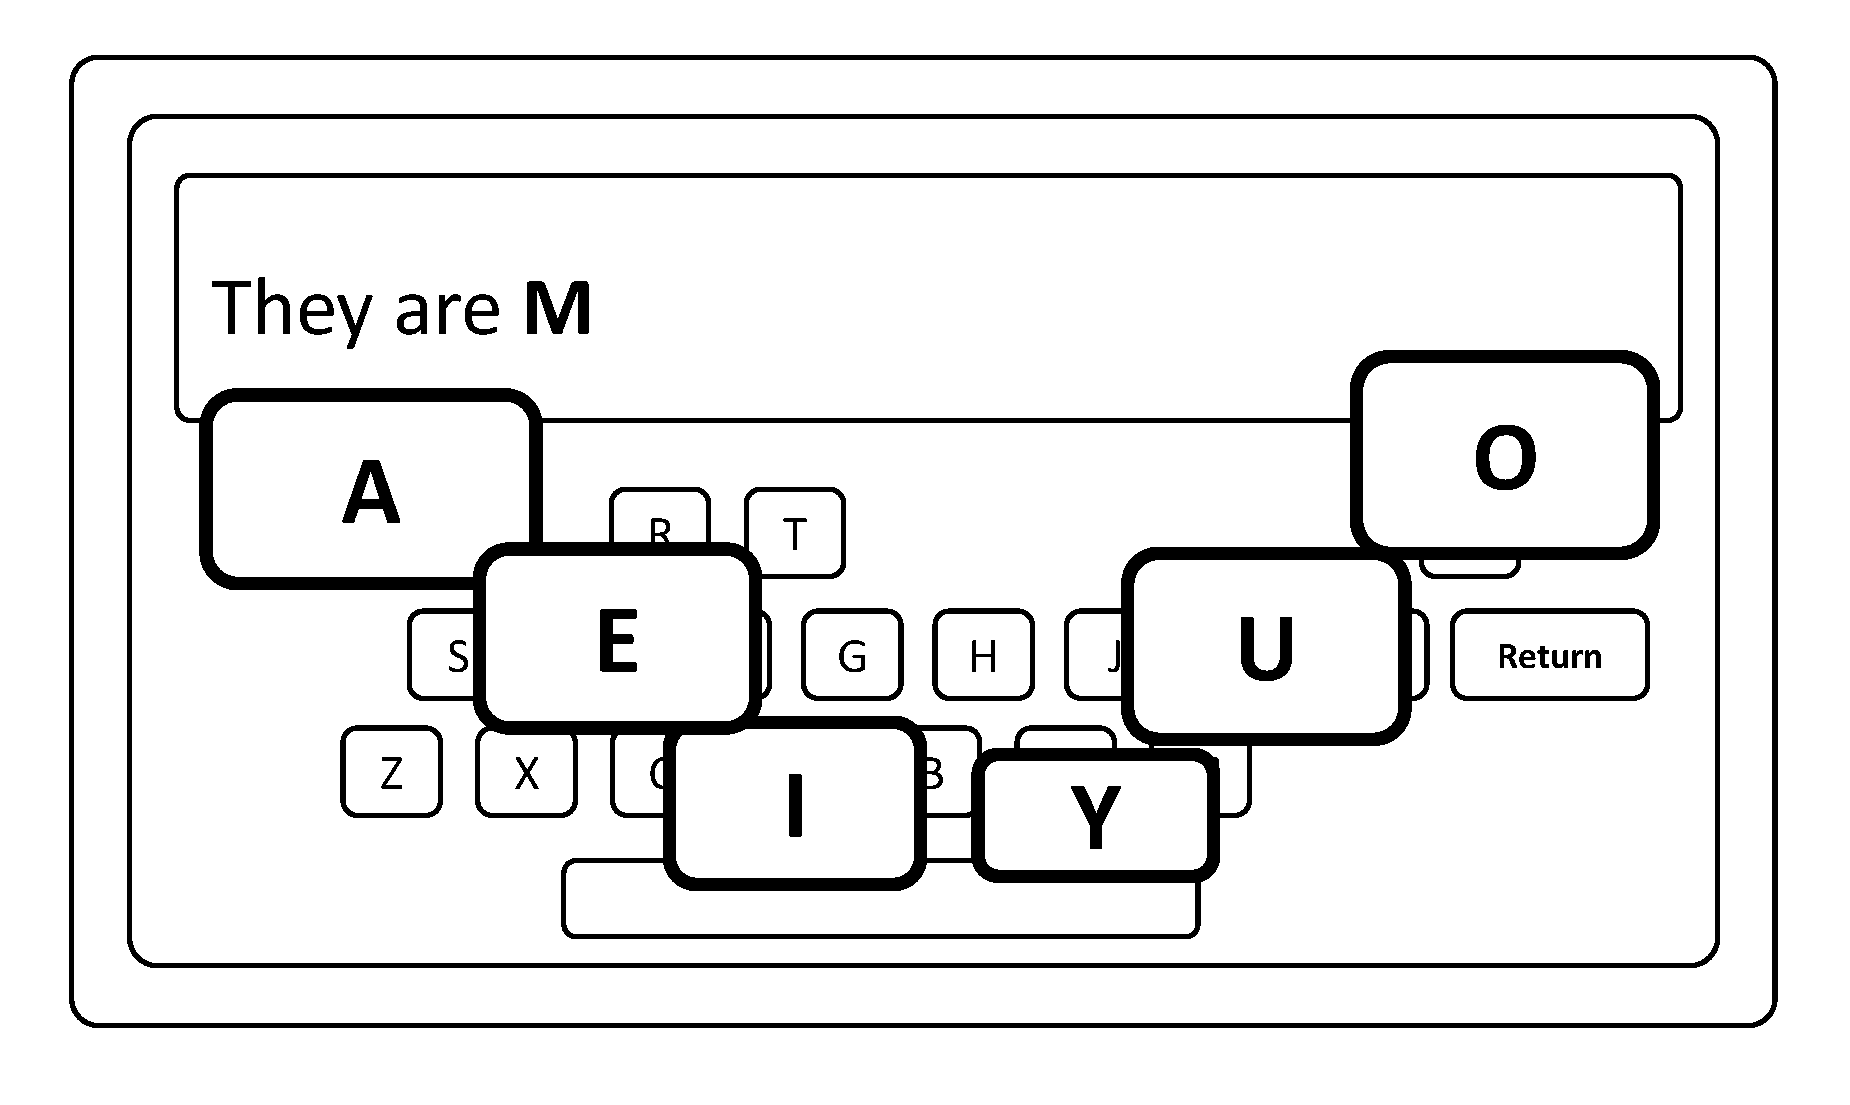 Virtual keyboard text entry method optimized for thumb typing, using partial word completion key entry values